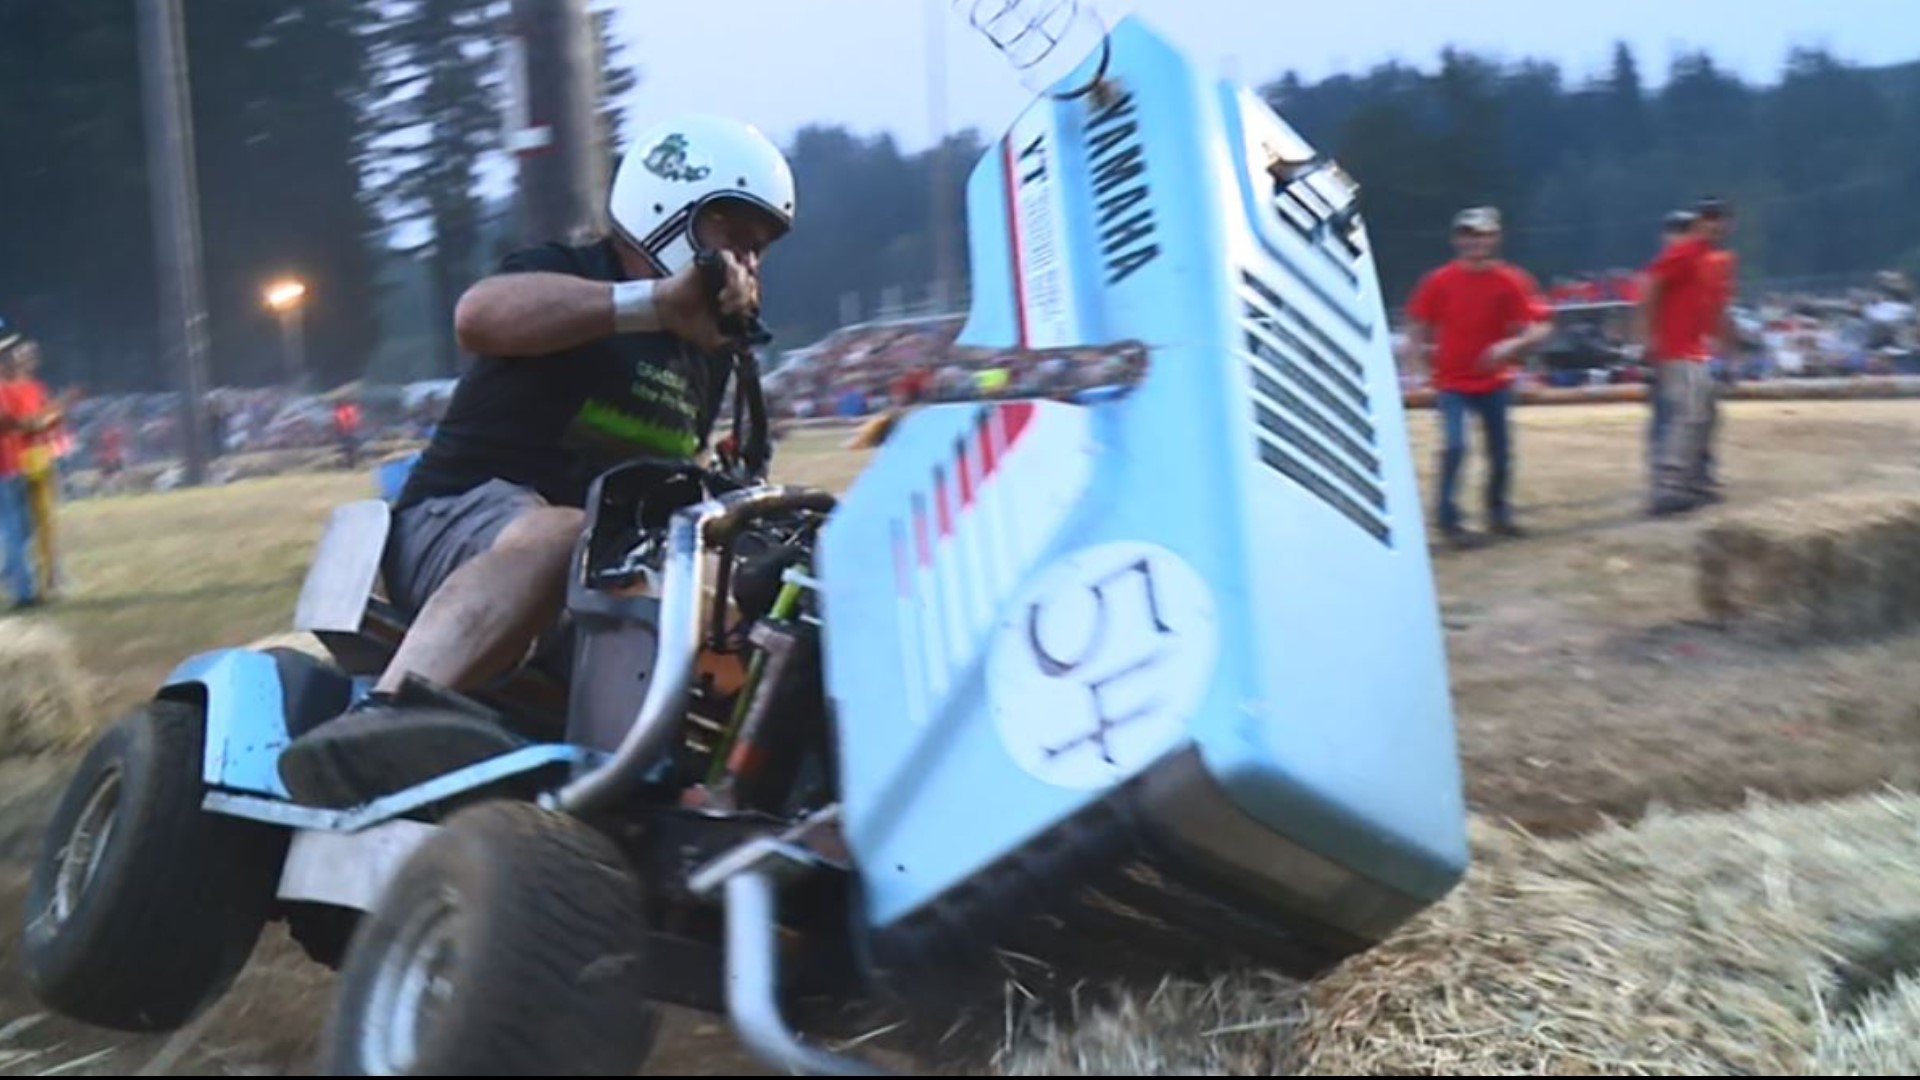 Souped-up lawnmowers and daredevil drivers make for a memorable night in the small Northwest town. #k5evening